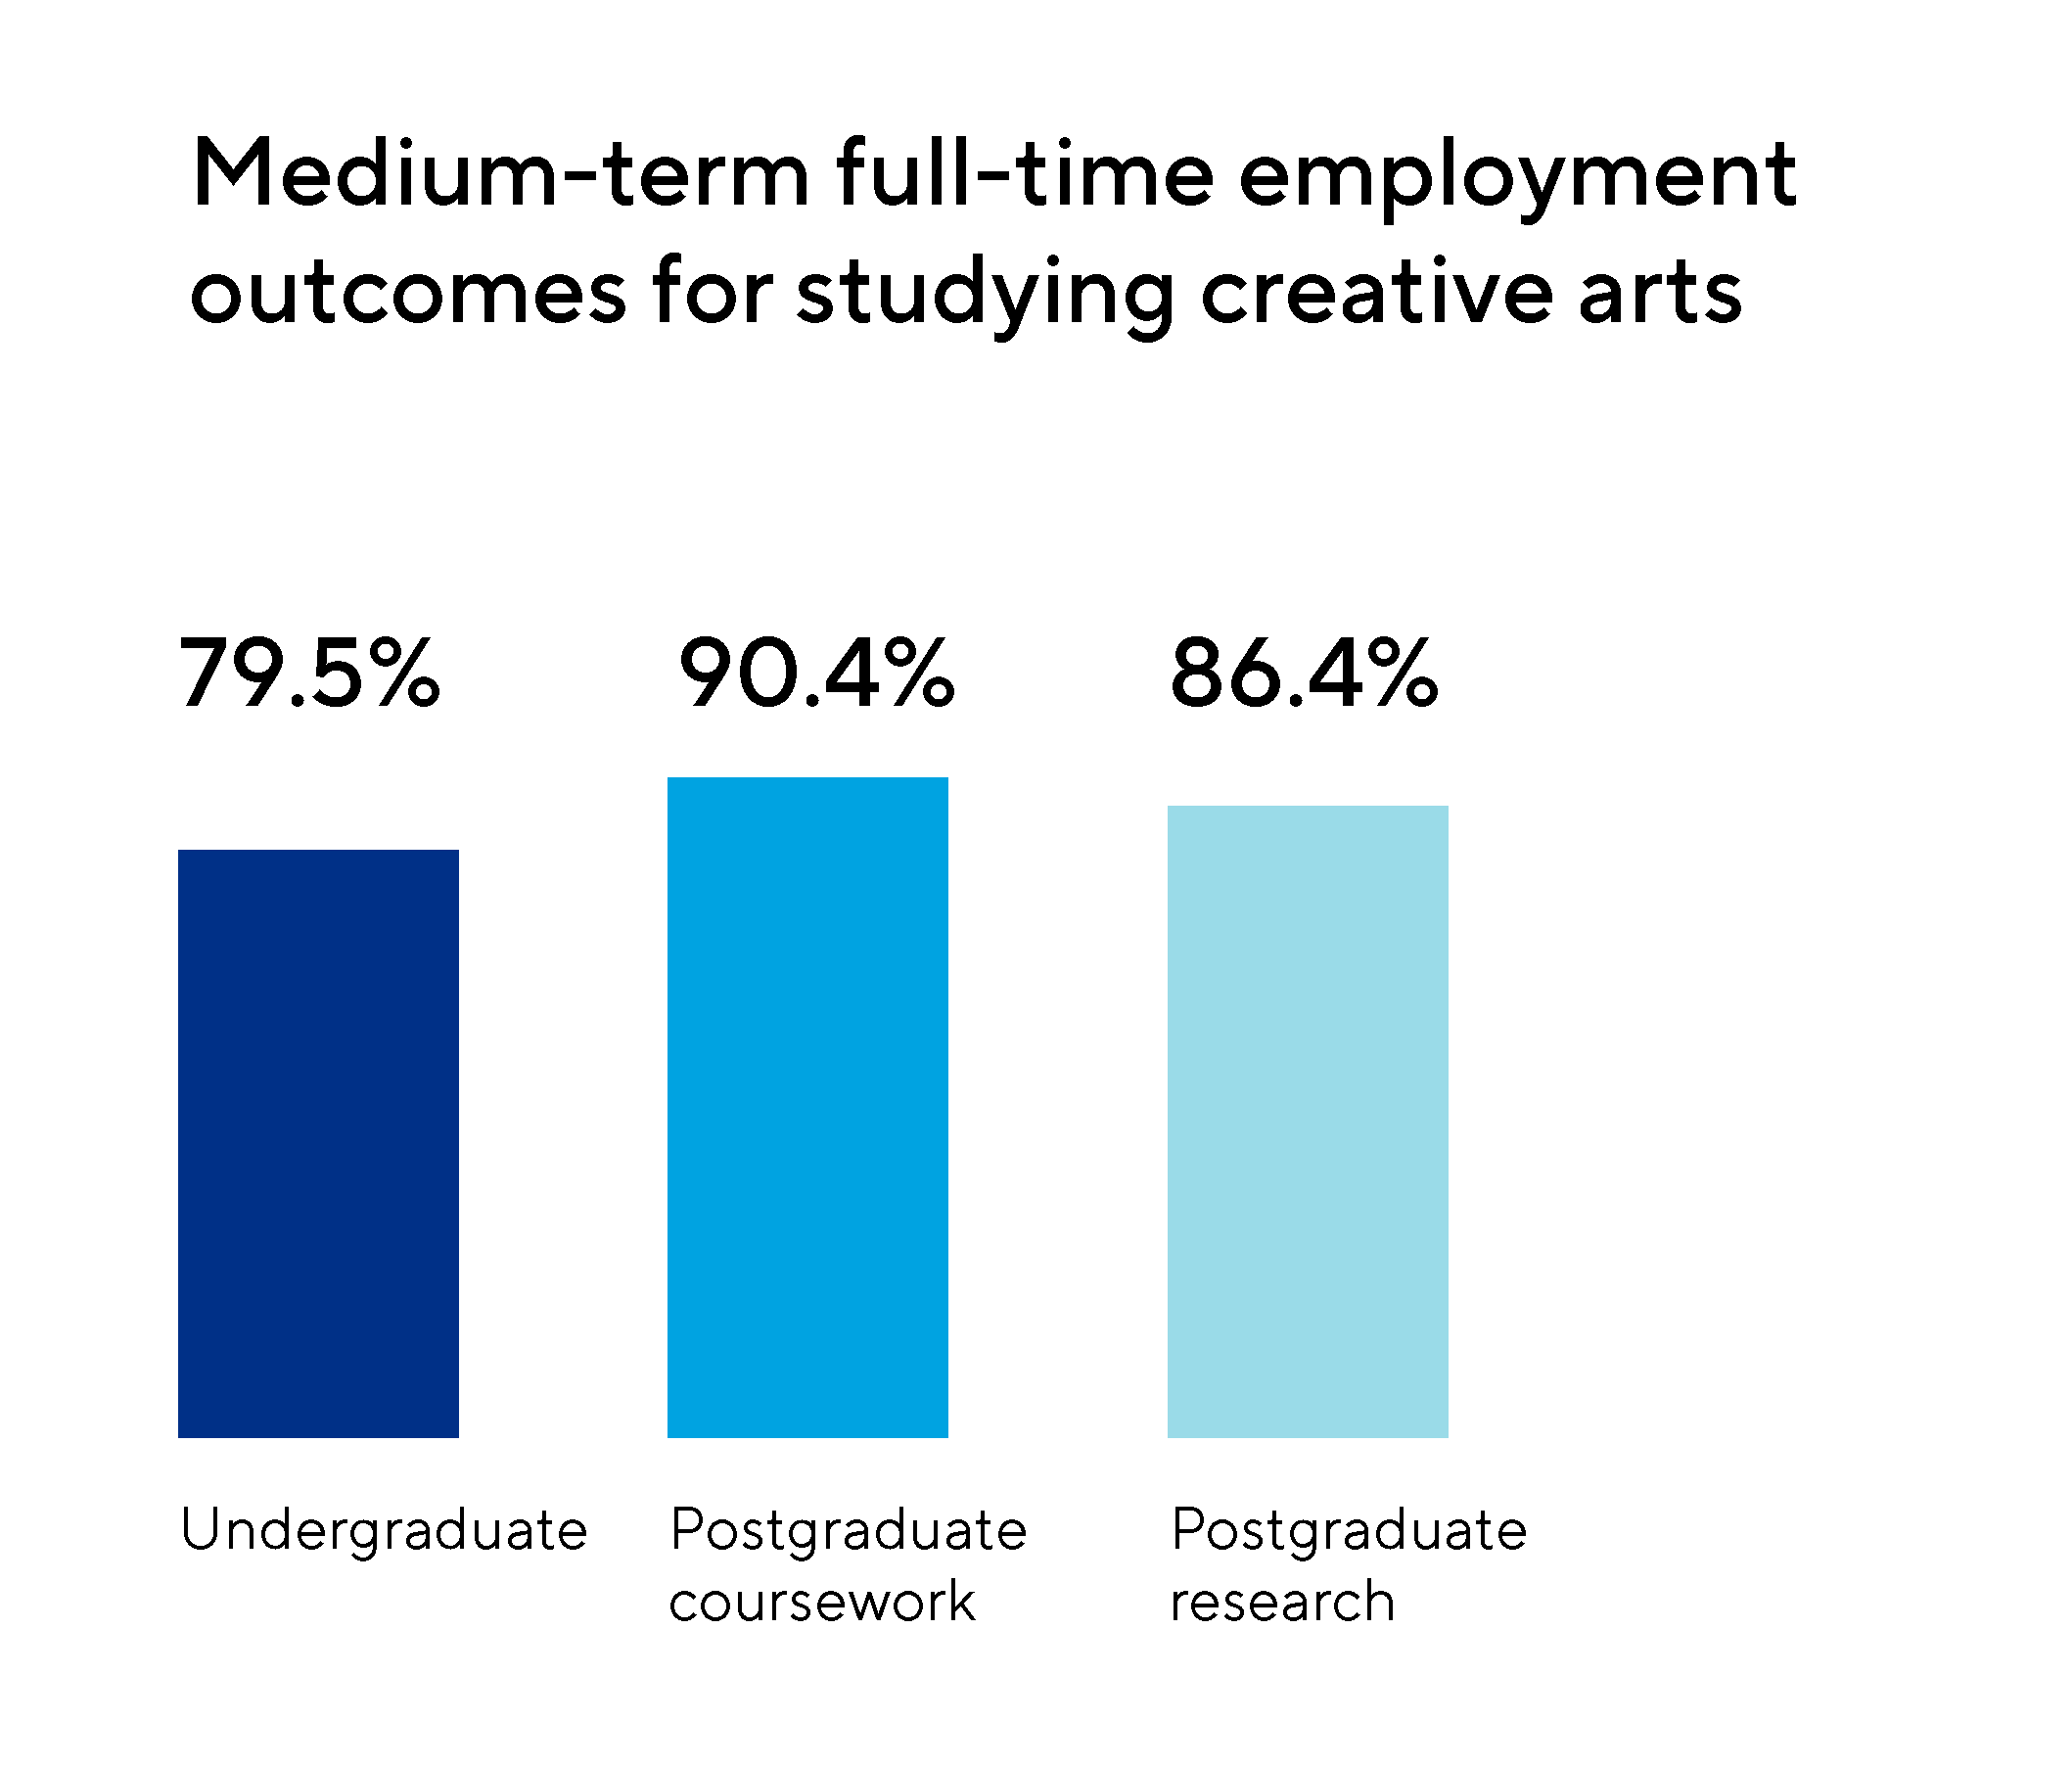 Image of the medium-term full-term employment outcomes for studying creative arts, with 79.5% allocated to undergraduates, 90.4% allocated to postgraduate coursework and 86.4% allocated to postgraduate research